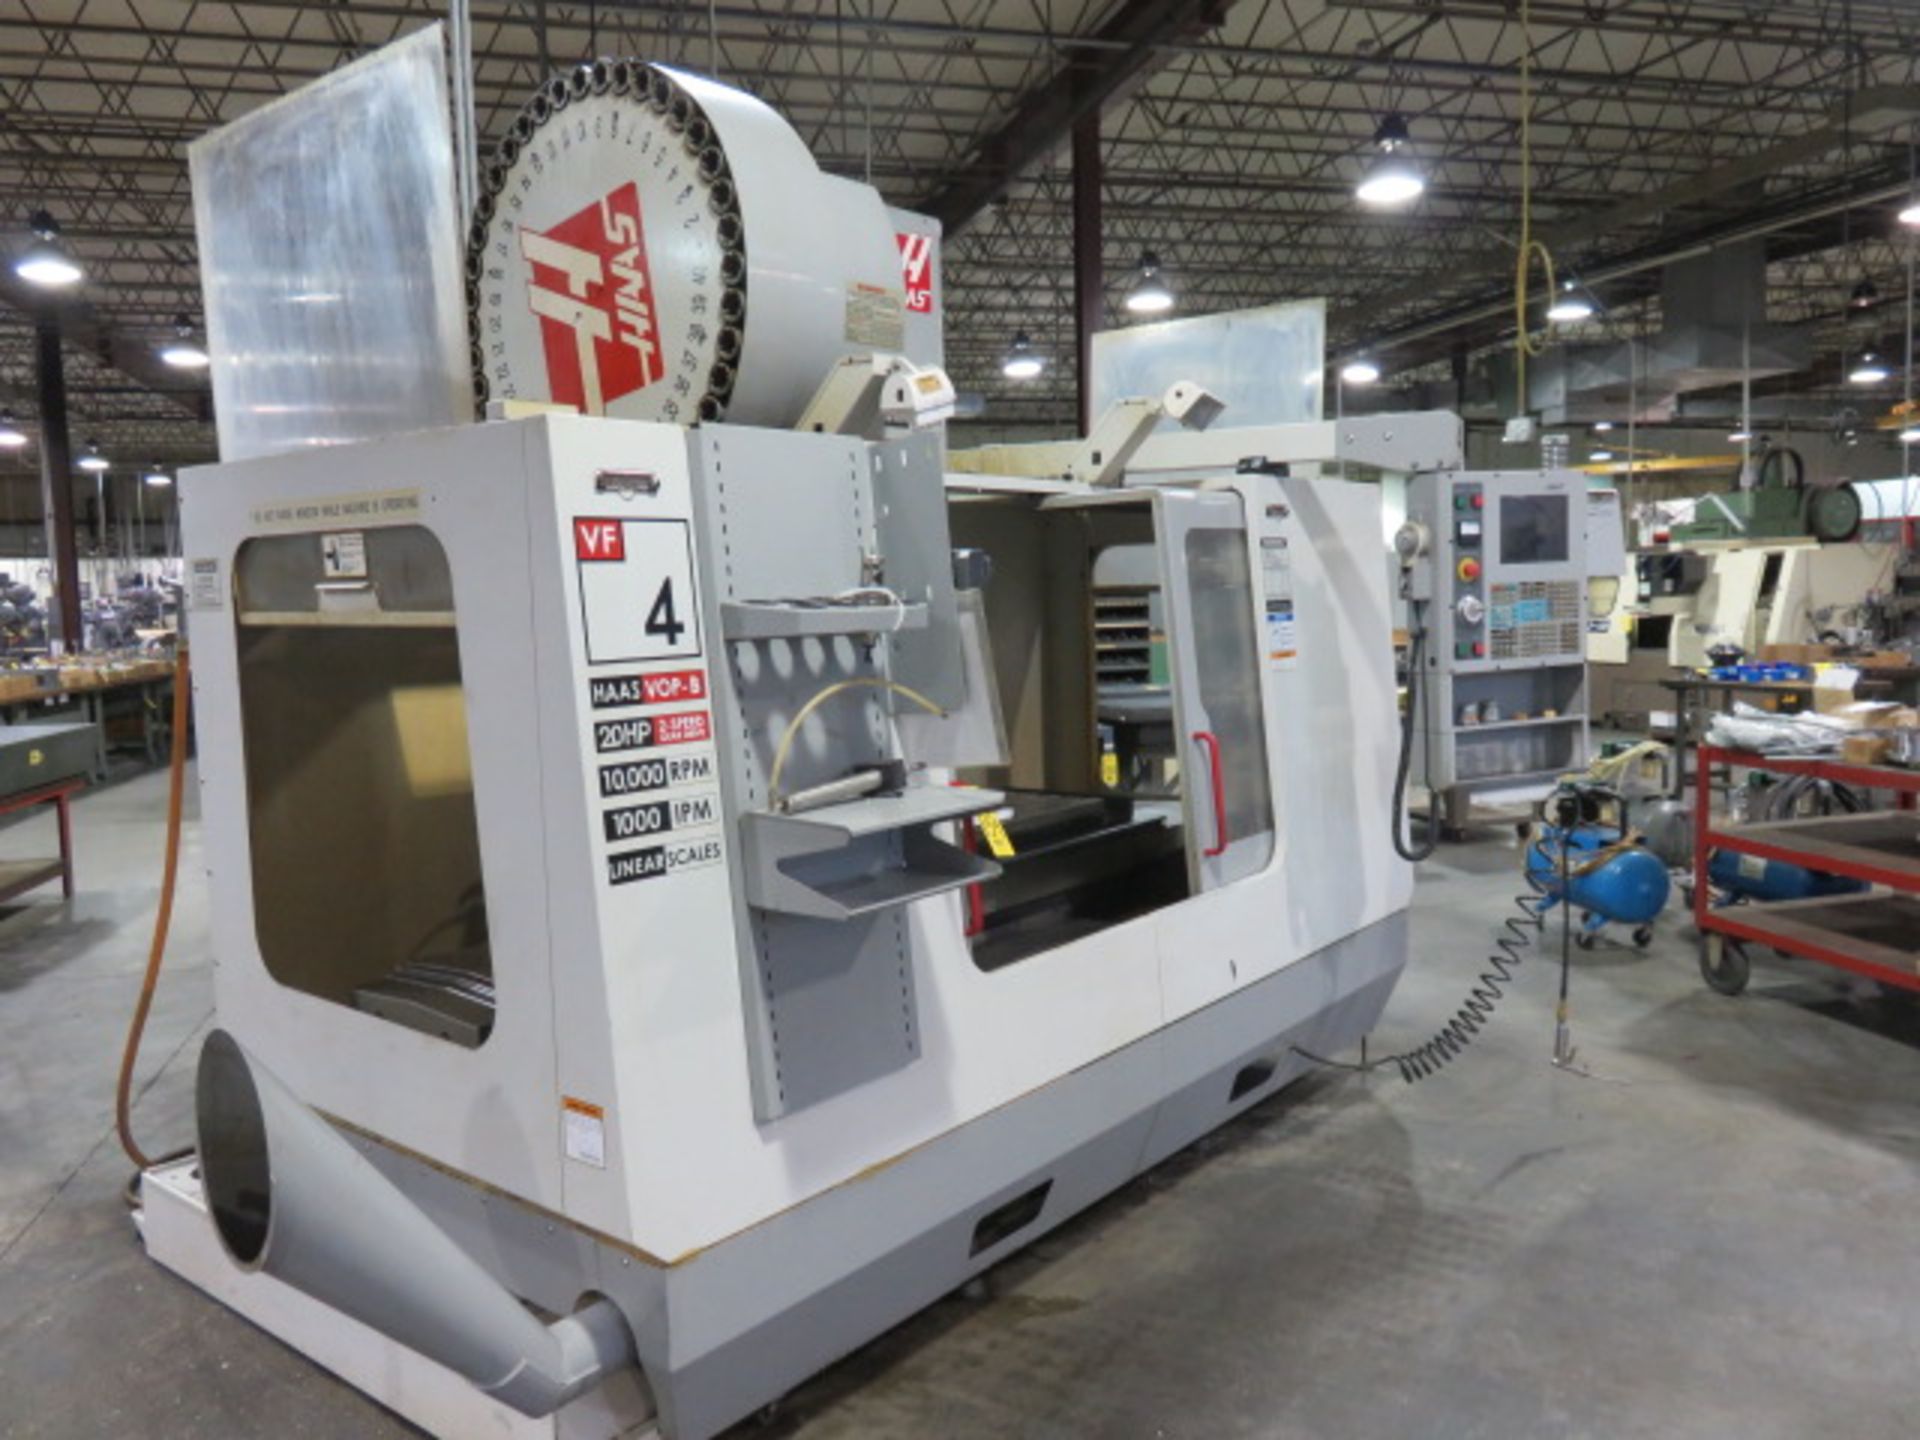 2003 HAAS VF-4B CNC VERTICAL MACHINING CENTER, S/N 33031, 11,462 HOURS, LINEAR SCALES - Image 5 of 5